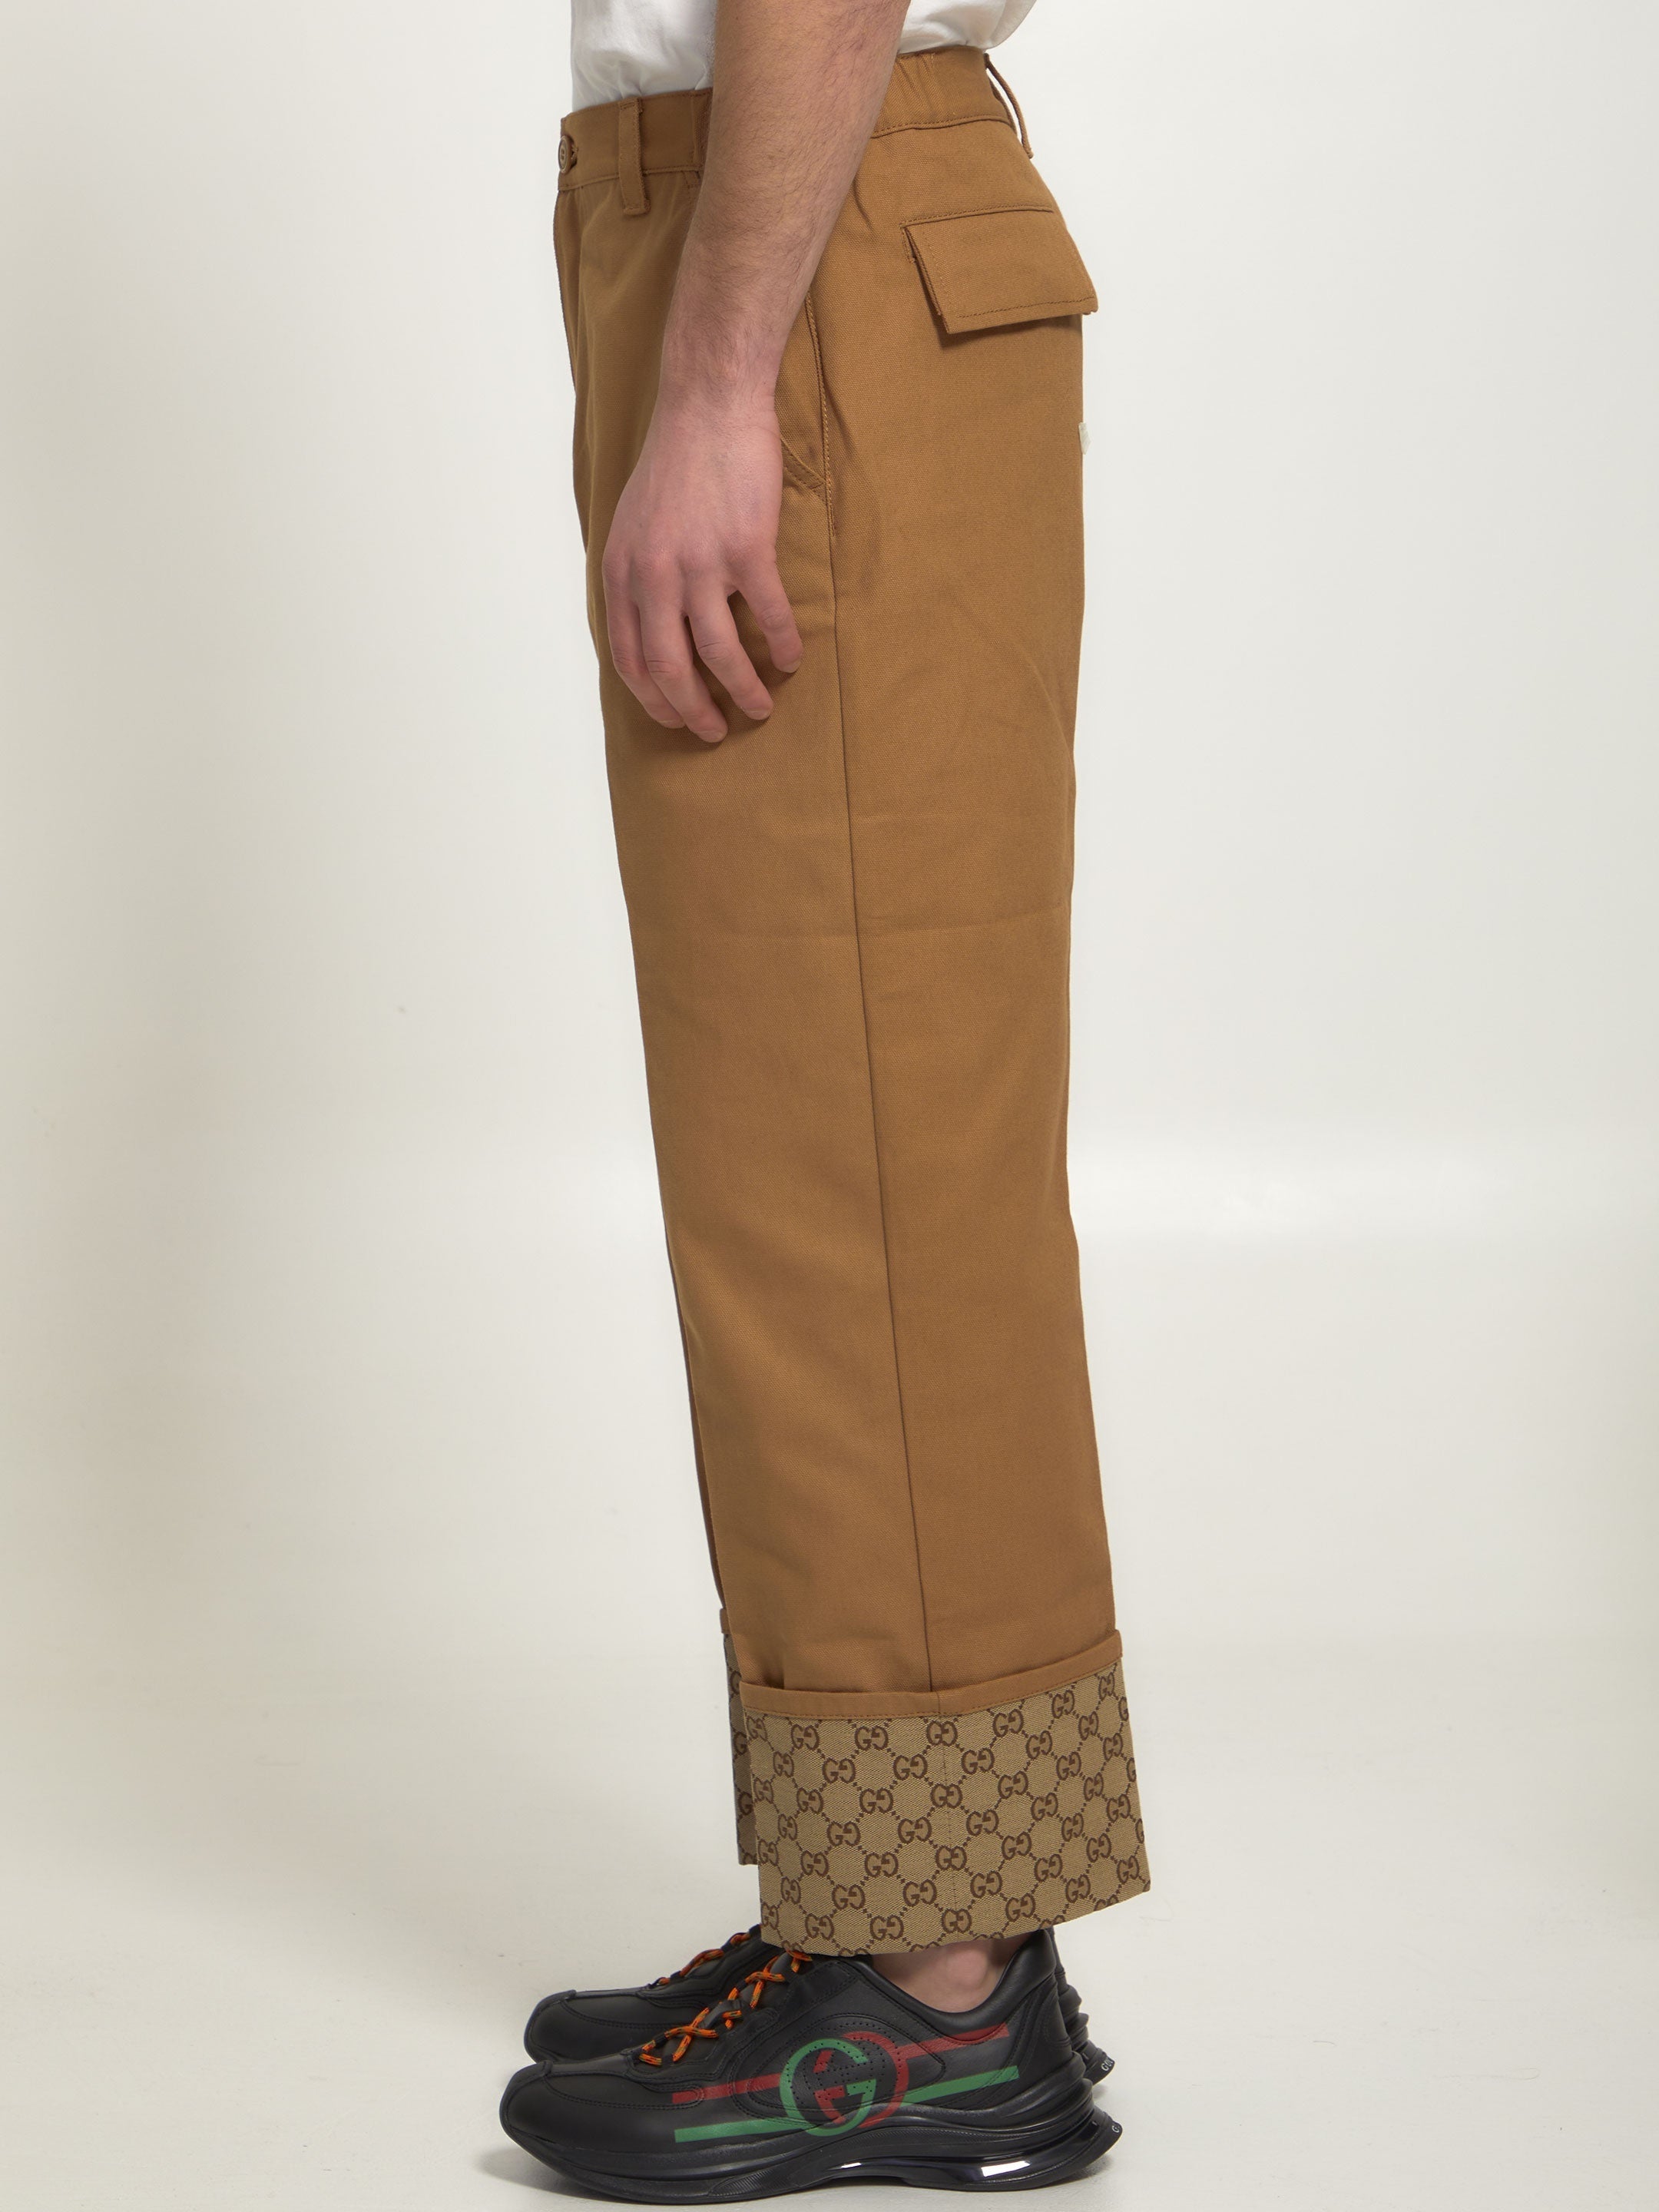 GUCCI-OUTLET-SALE-Beige-trousers-with-GG-cuff-Hosen-ARCHIVE-COLLECTION-3.jpg